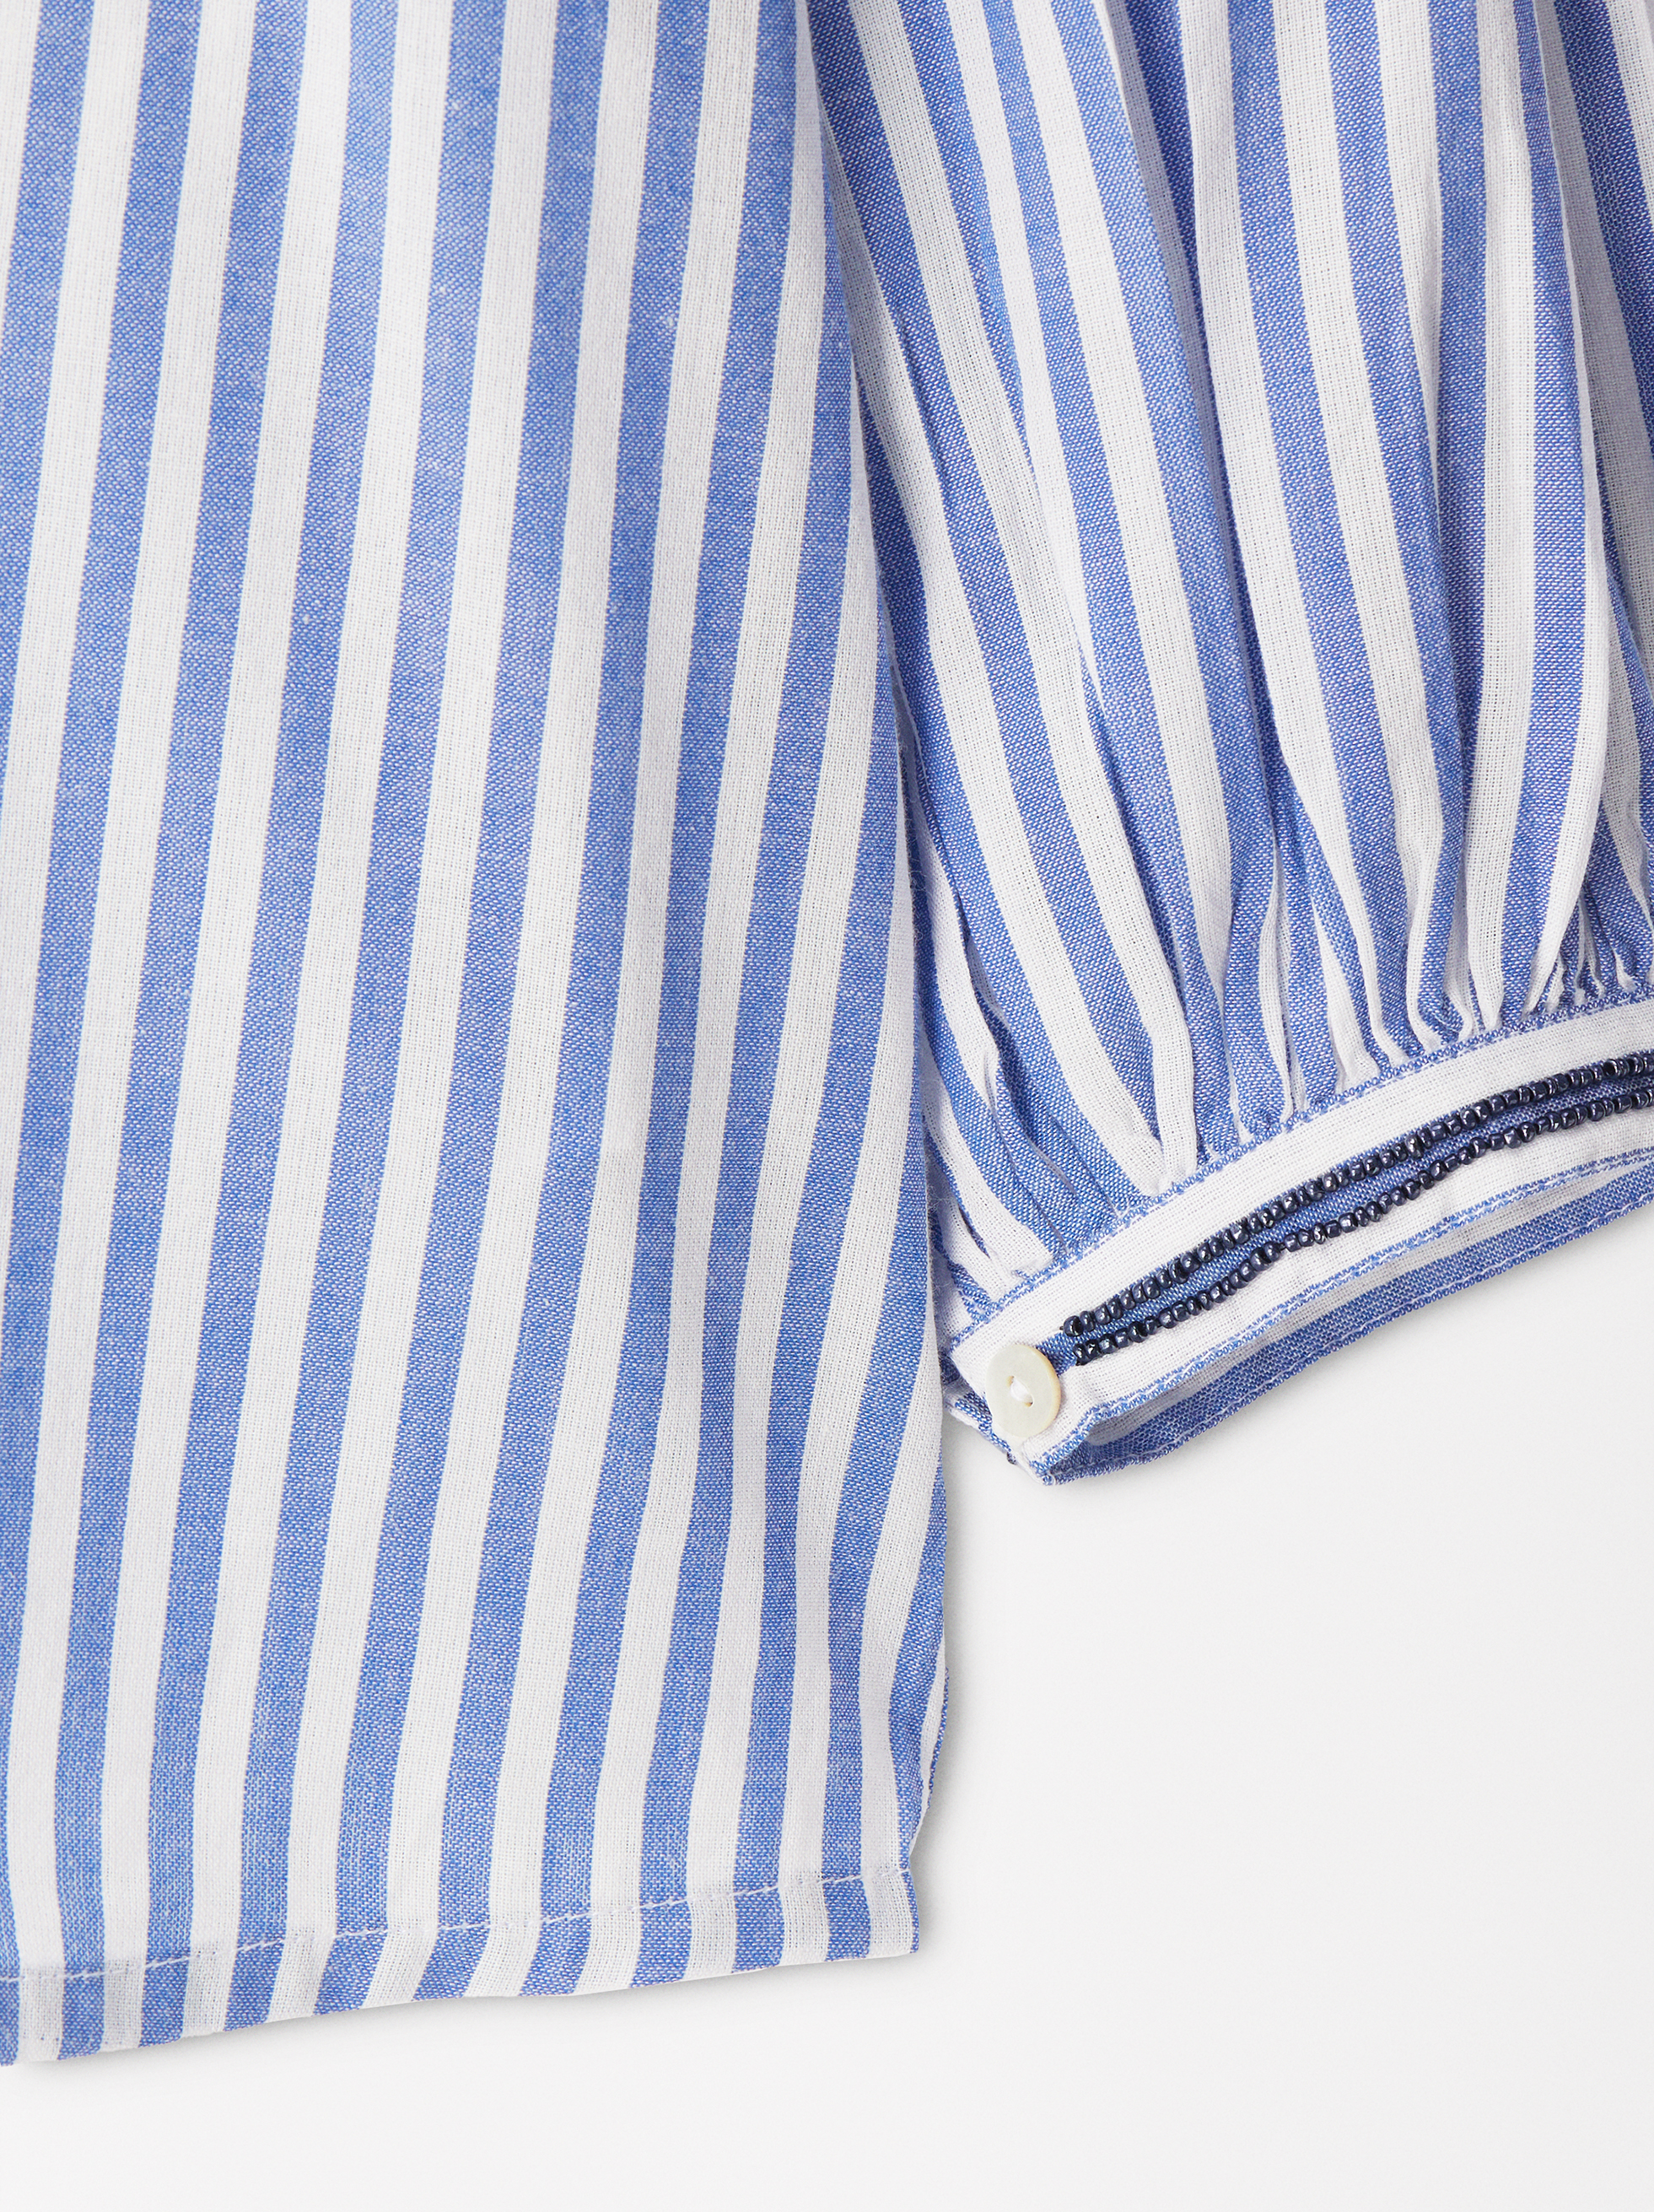 100% Cotton Striped Shirt image number 7.0